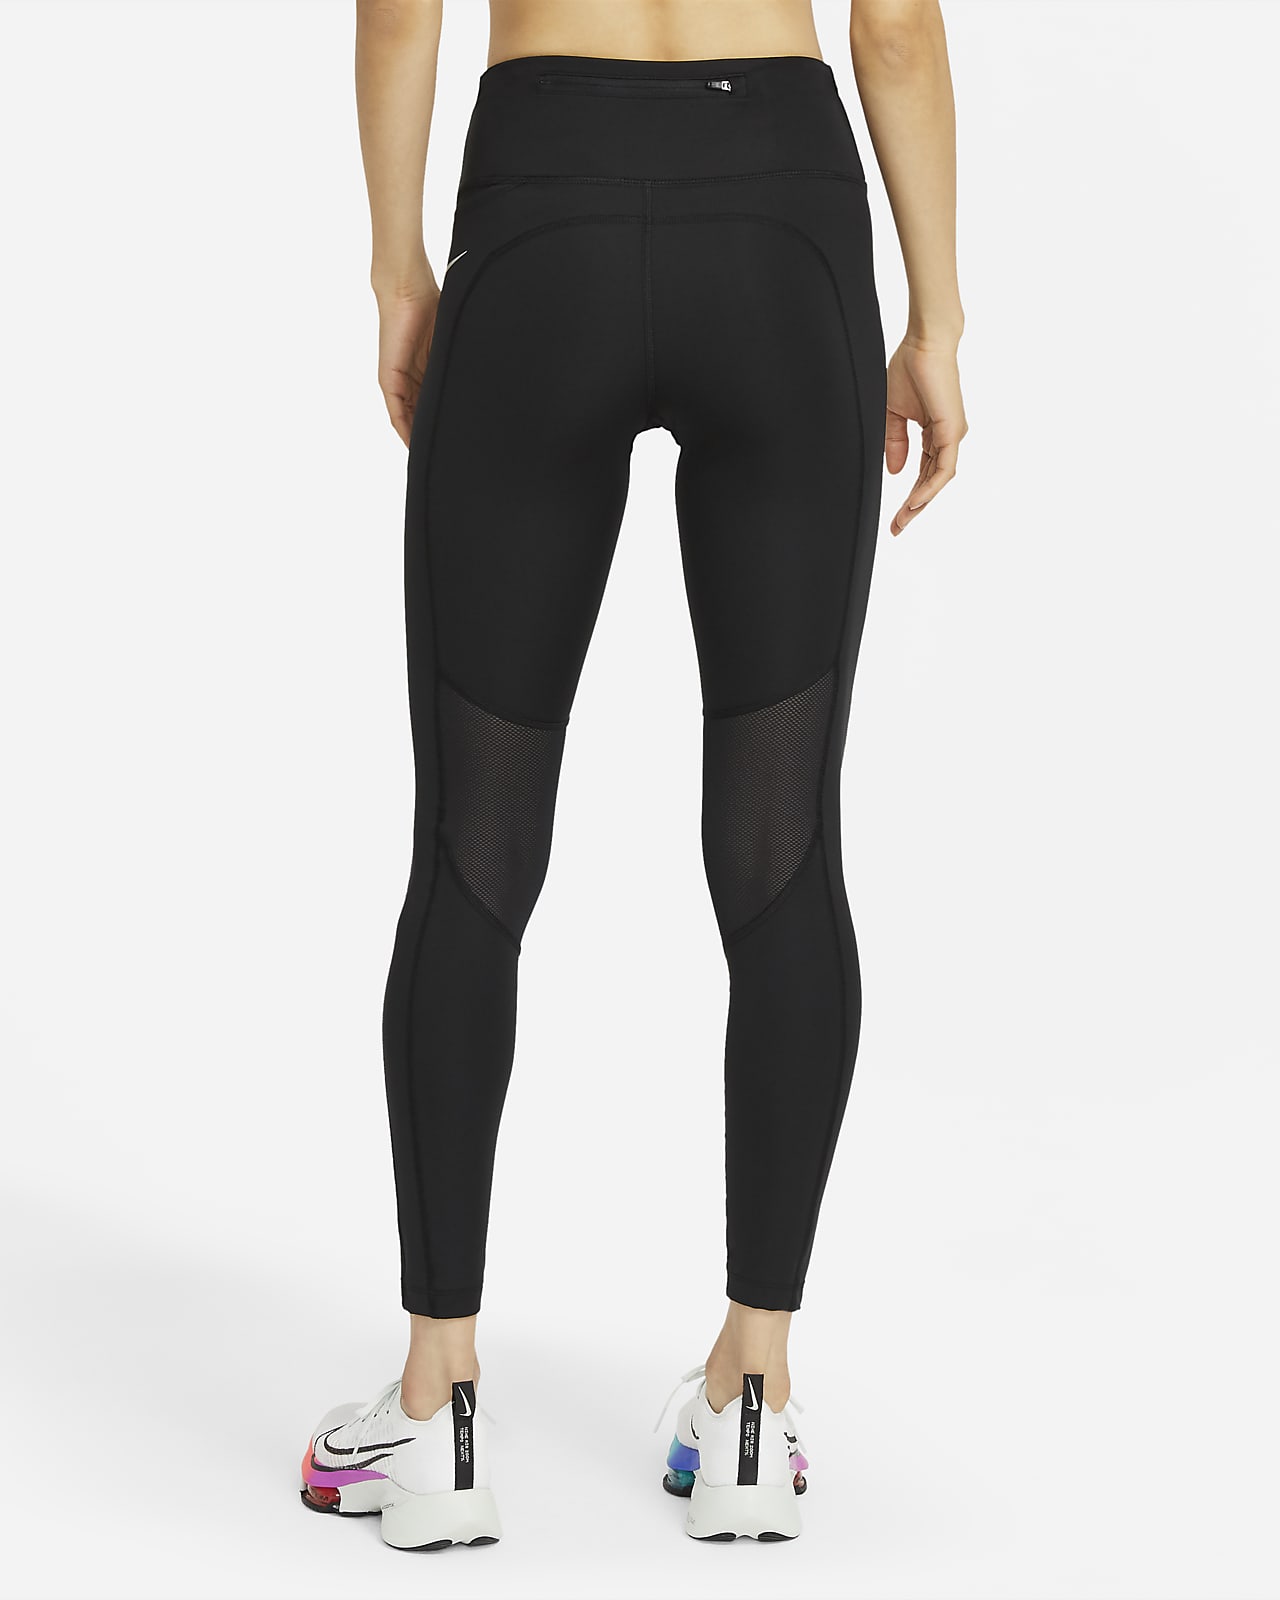 Easy to understand Copyright Against the will Nike Epic Fast Women's Mid-Rise Pocket Running Leggings. Nike.com